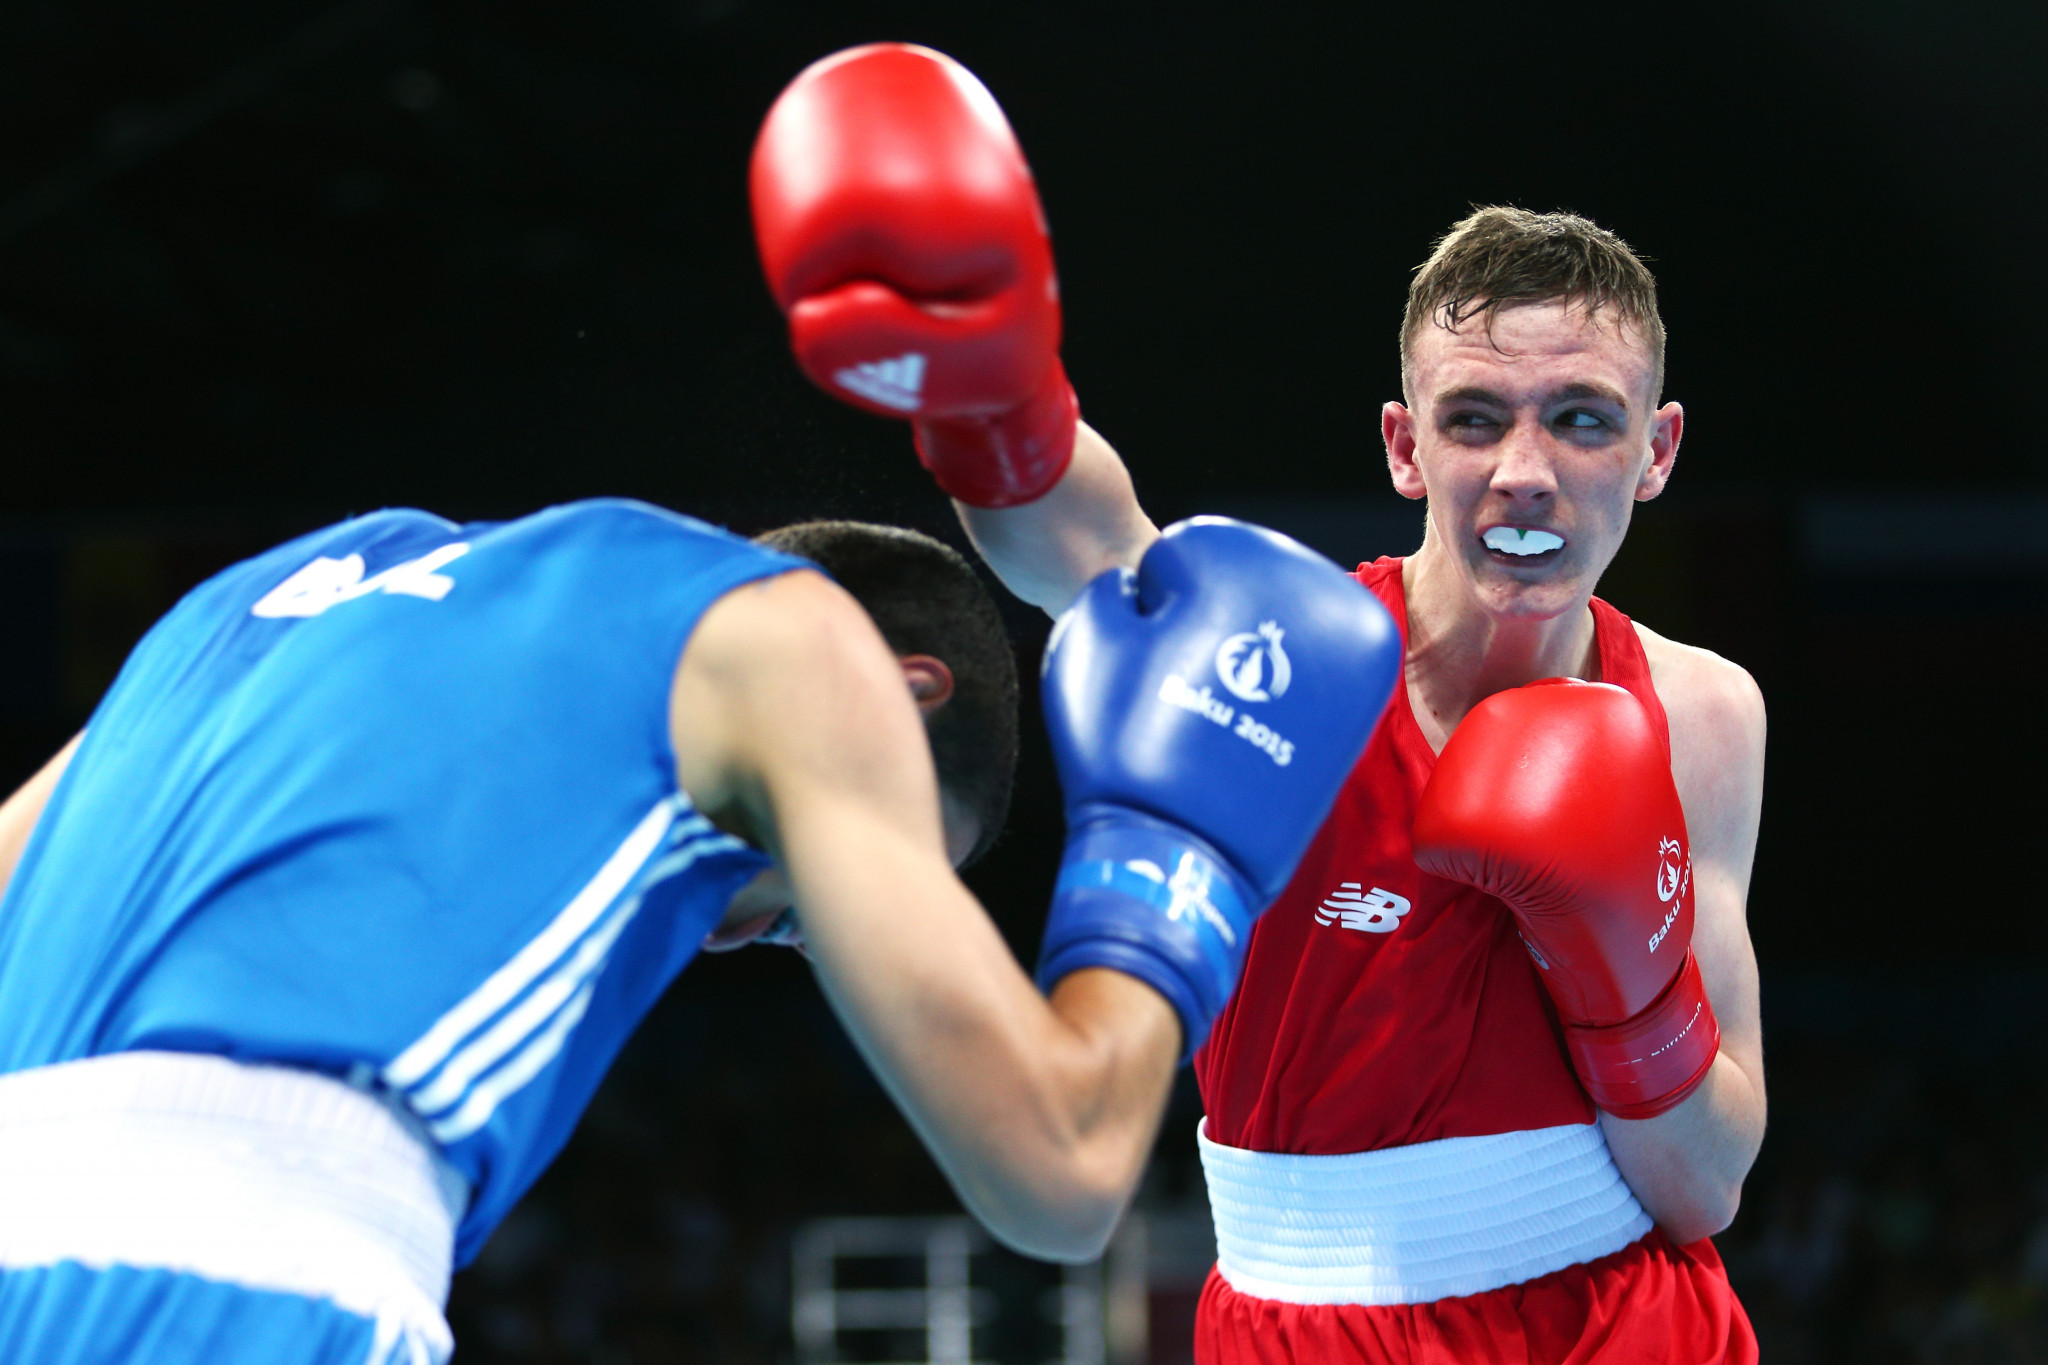 European Games boxing silver medallist Brendan Irvine of Ireland has been ruled out of Minsk 2019 ©Getty Images